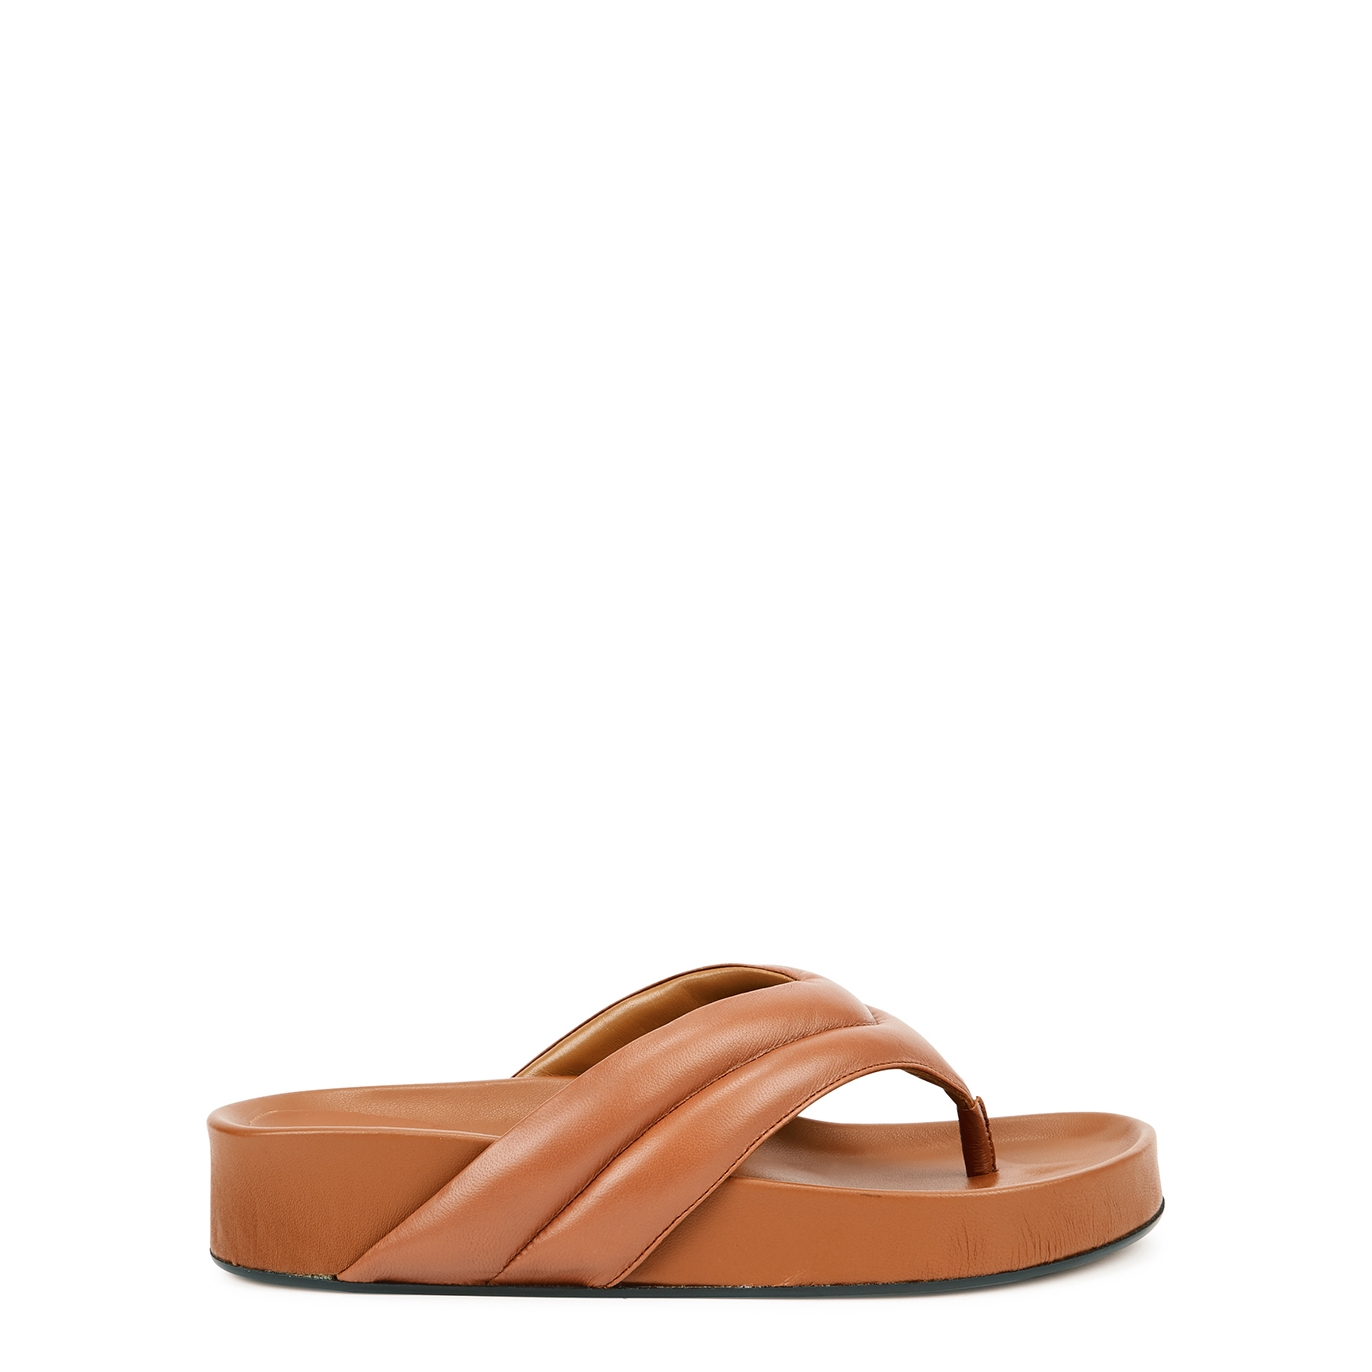 ATP Atelier Bellano Brown Leather Thong Sandals - TAN - 3